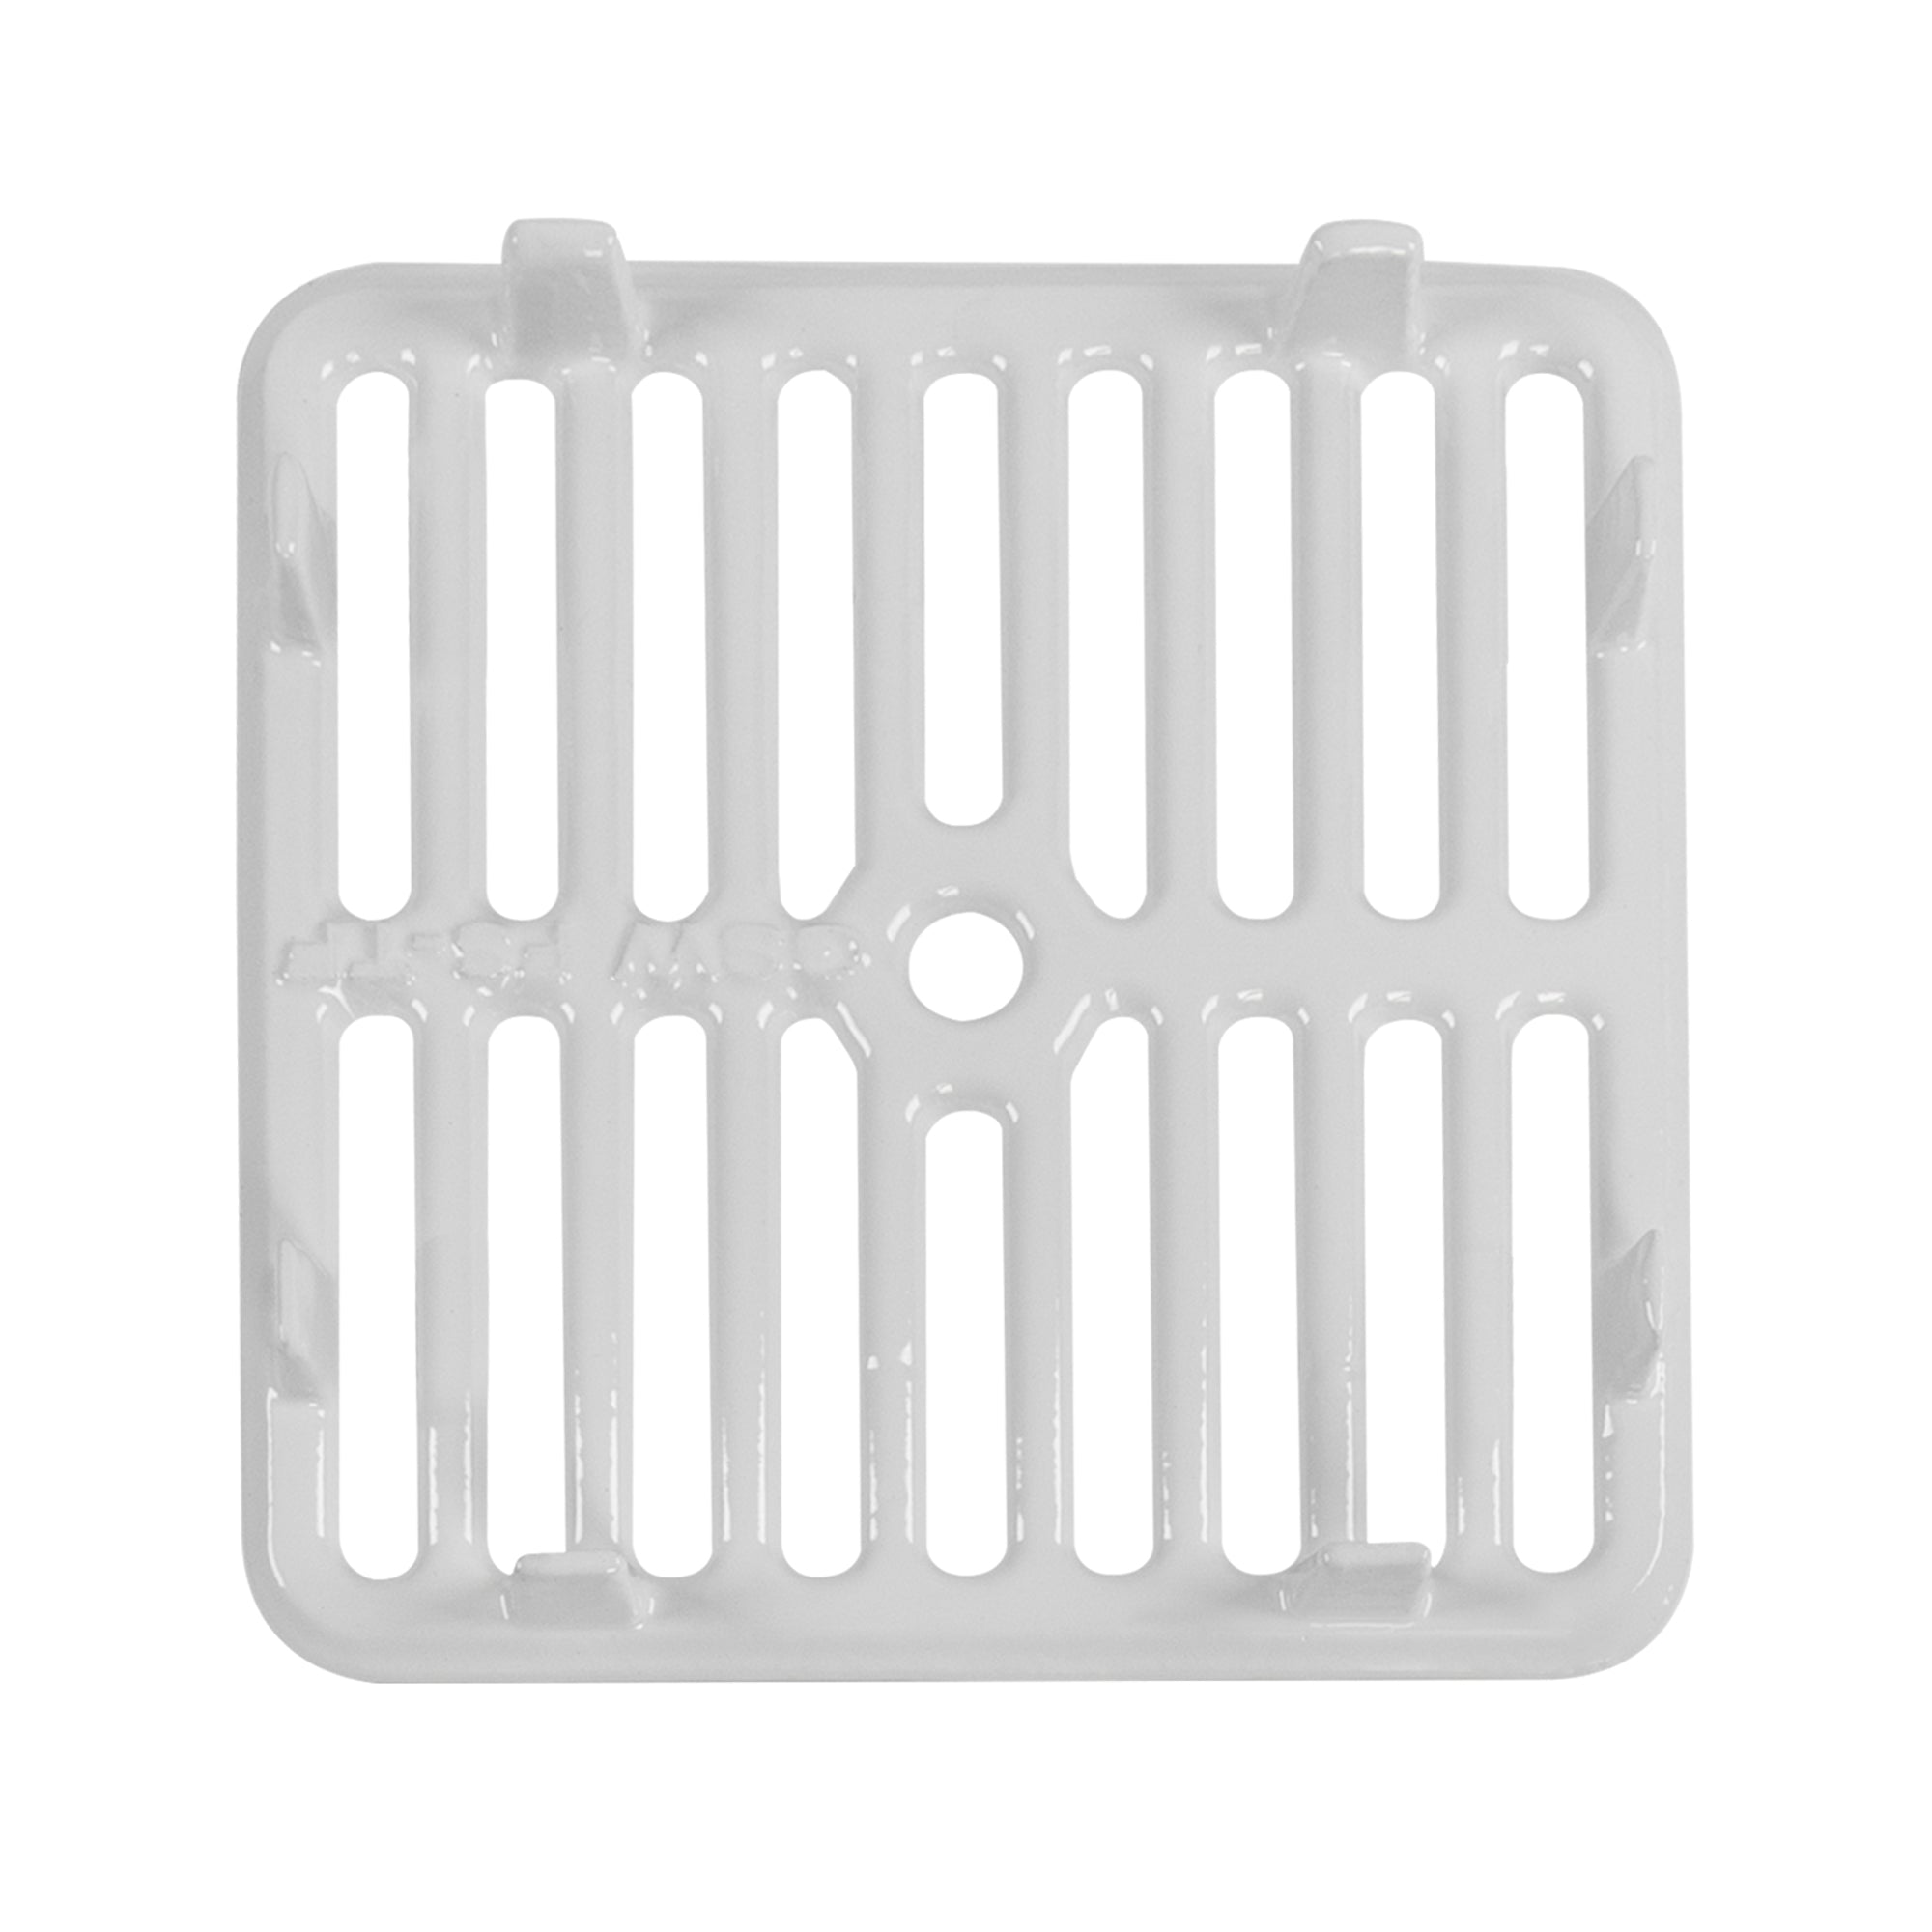 GSW Cast Iron Porcelain Floor Sink Top Grate with Ceramic Surface FS-TF, 9-⅜” x 9-⅜” x 1-¼” - Perfect for Restaurant, Bar, Buffet (Full Size)